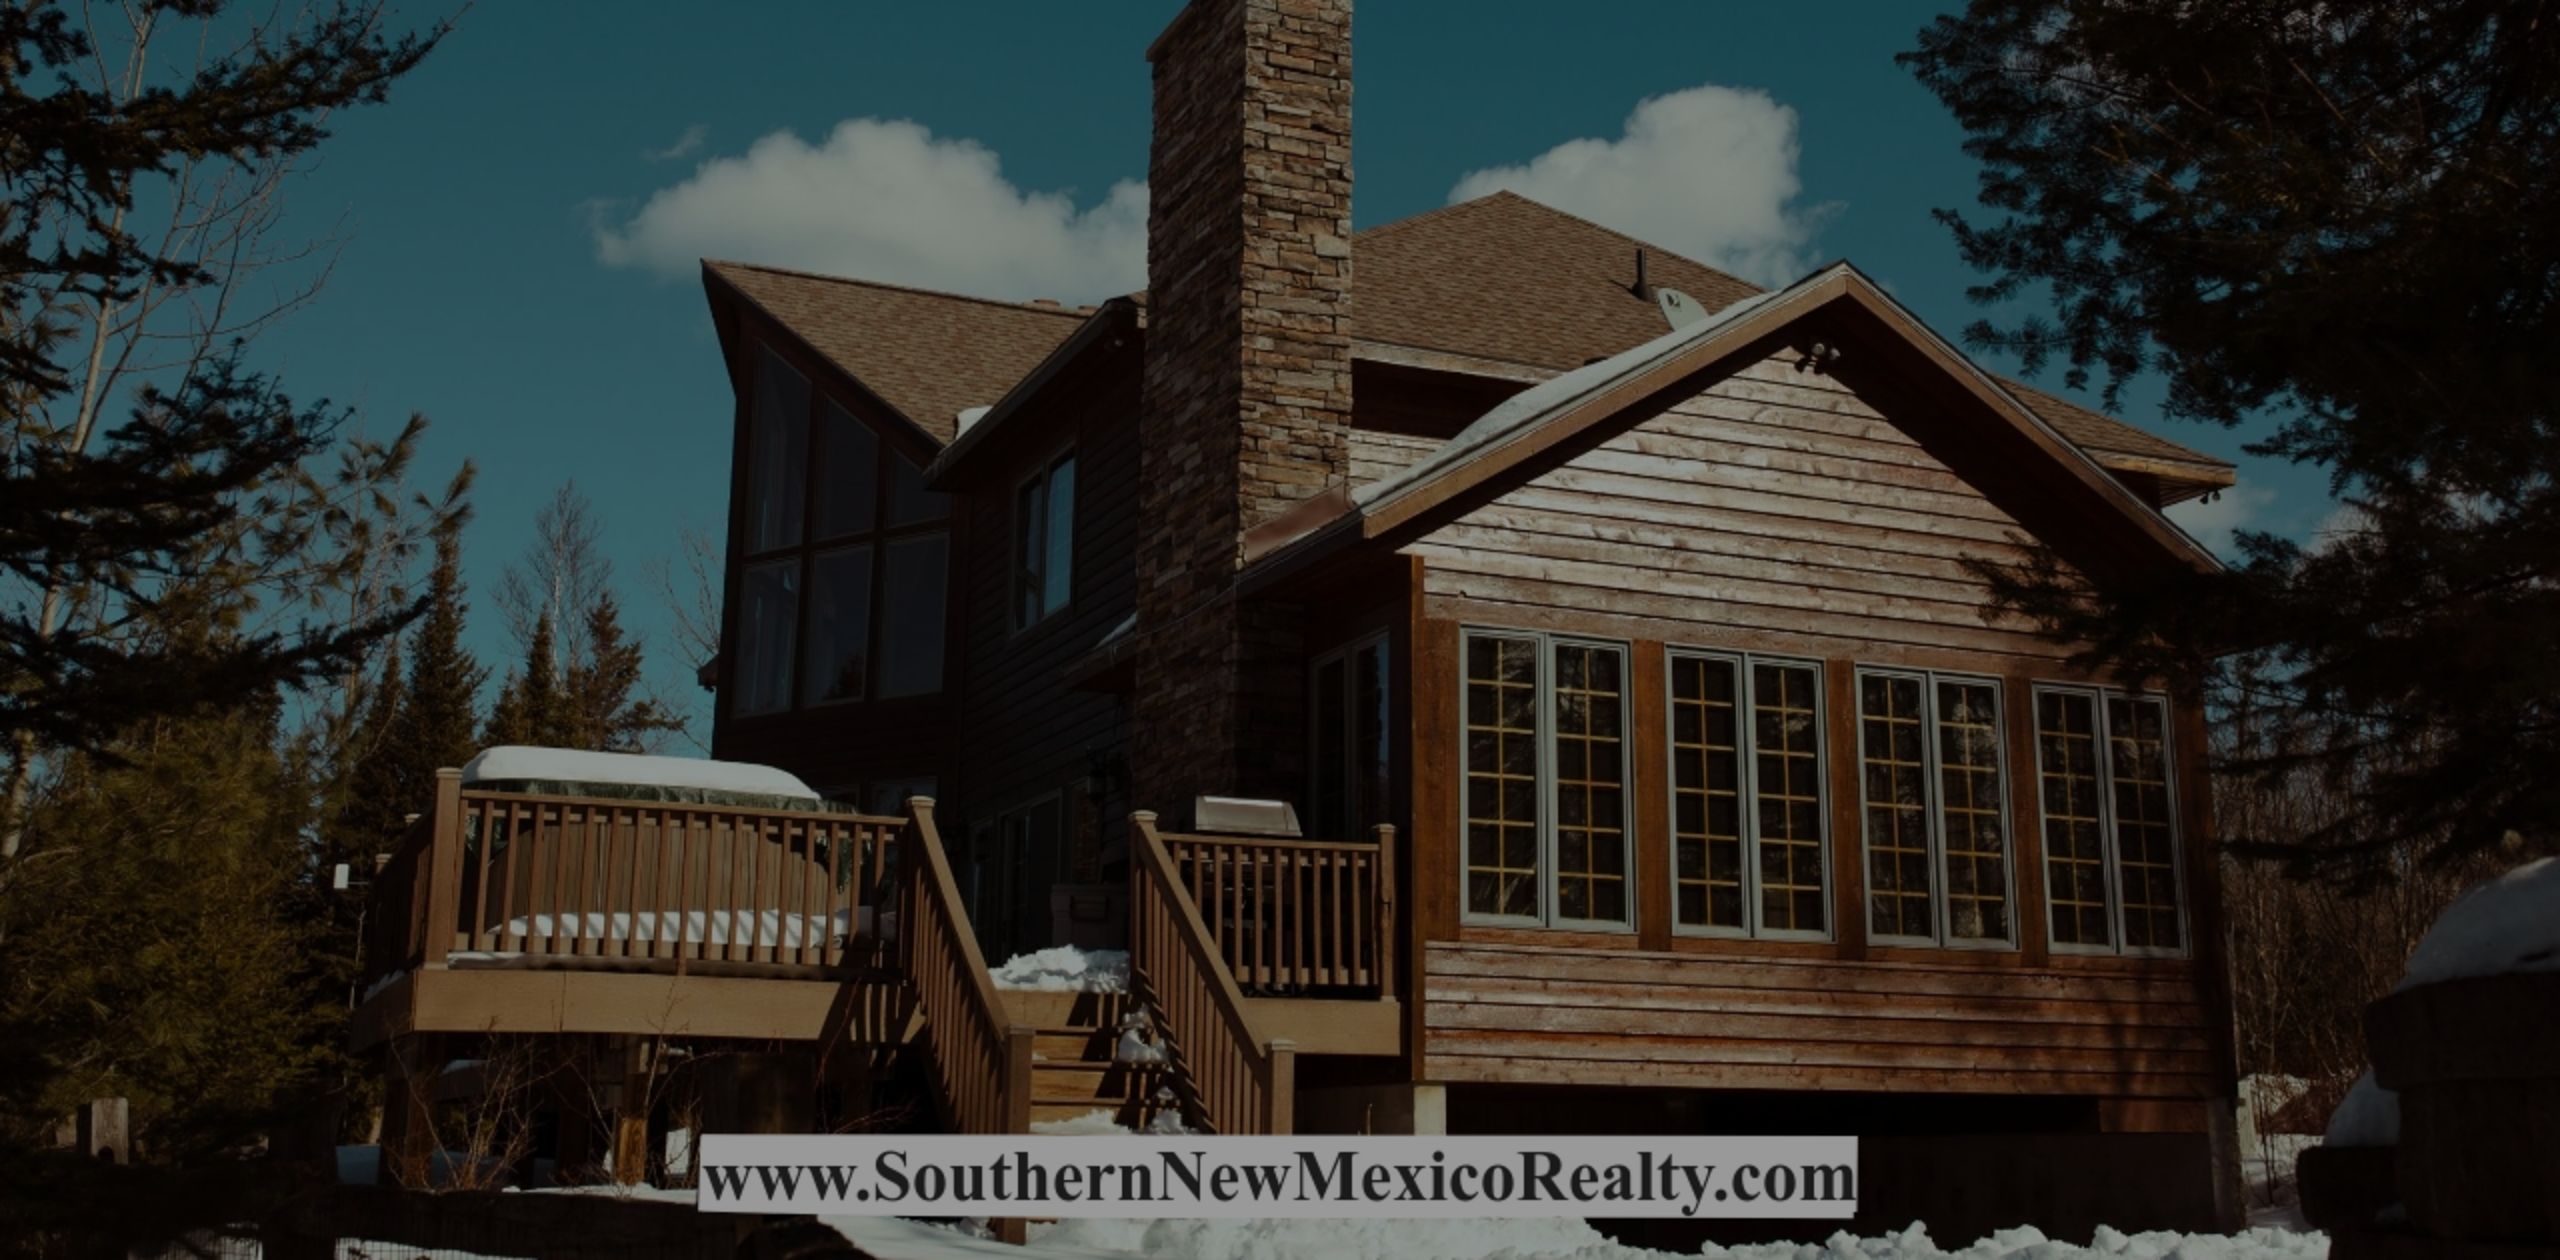 Buying A Vacation Home For Sale In Ruidoso, New Mexico